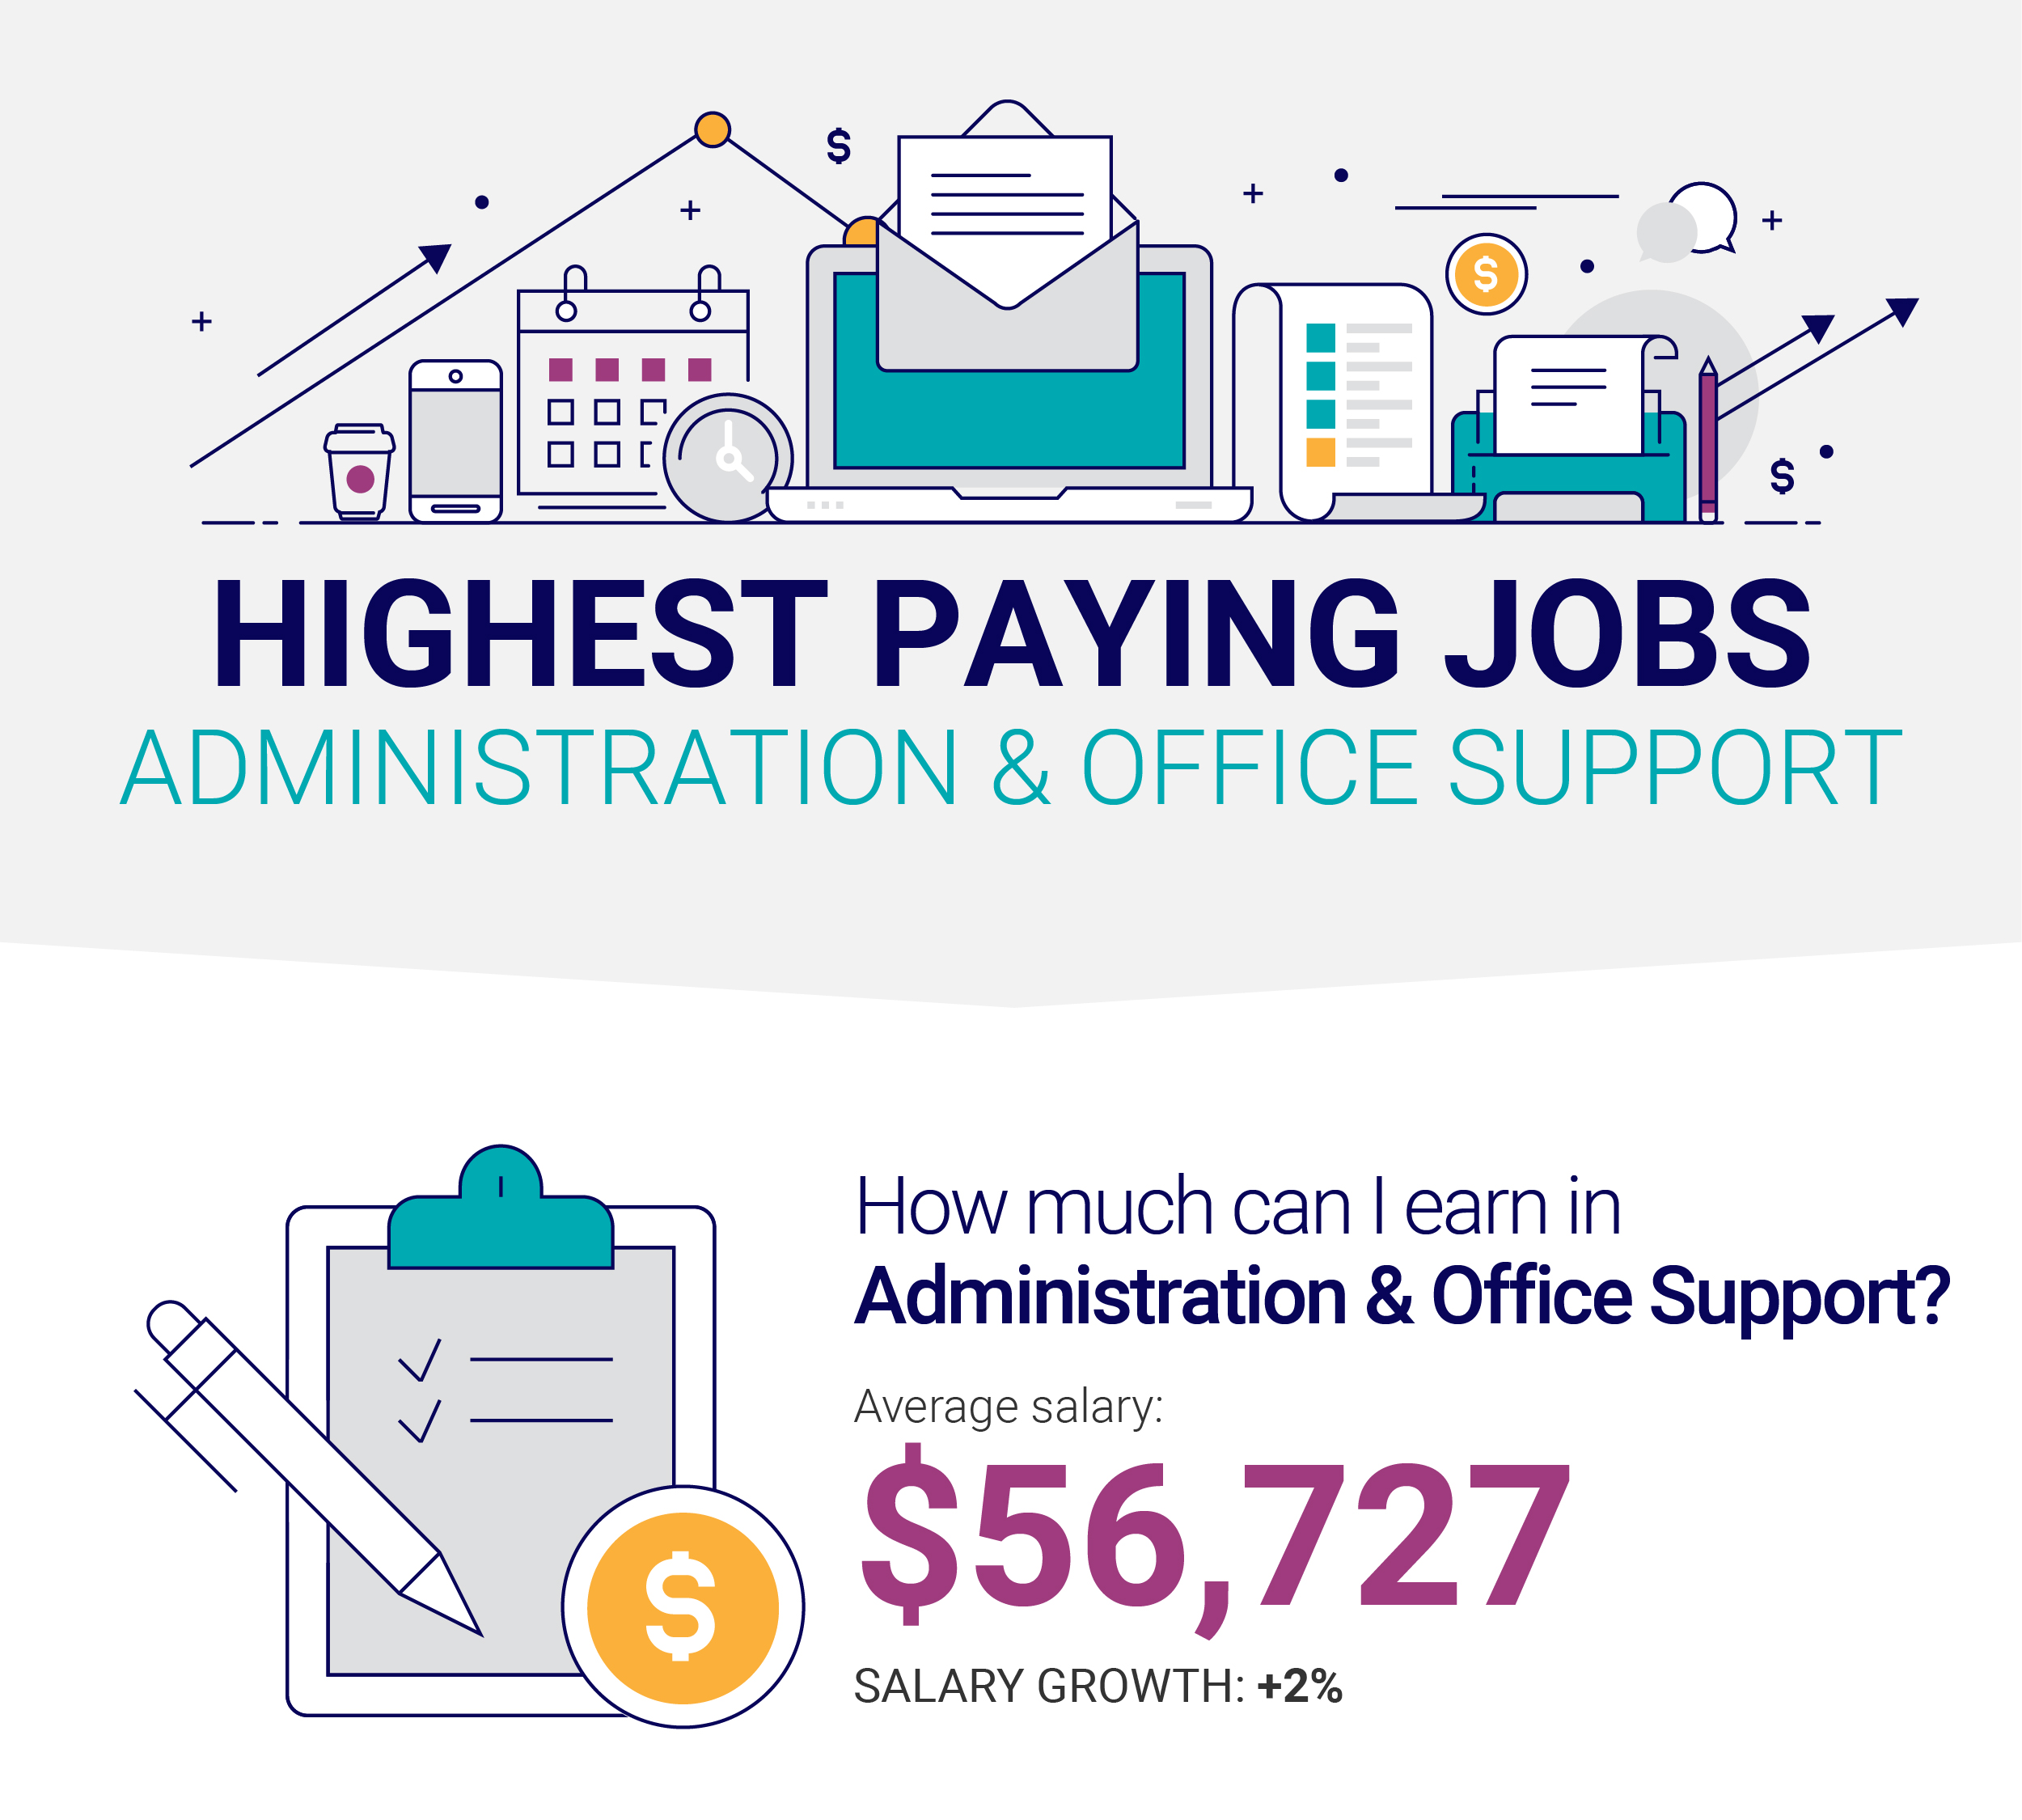 How much can I earn in Administration & Office Support?